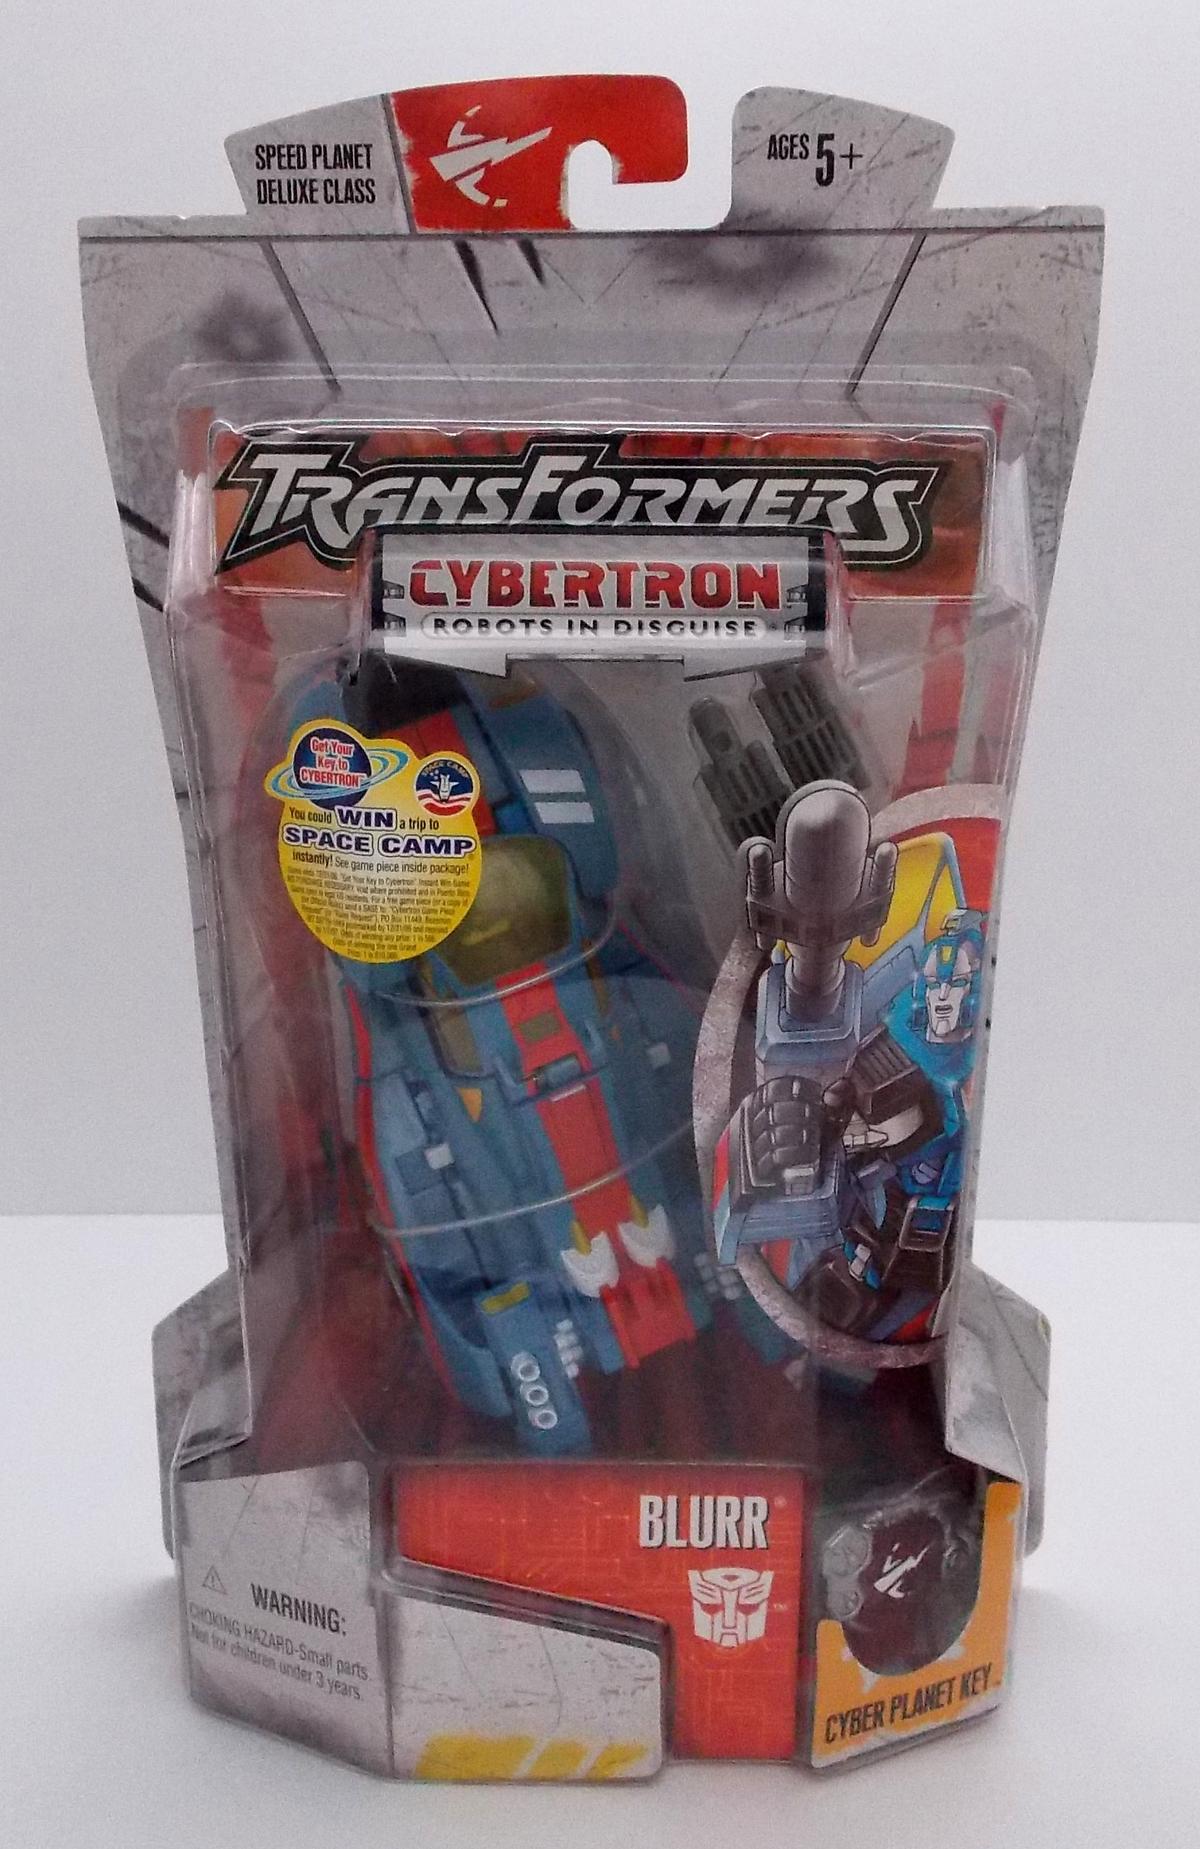 Blurr Cybertron Deluxe Class Transformers Action Figure